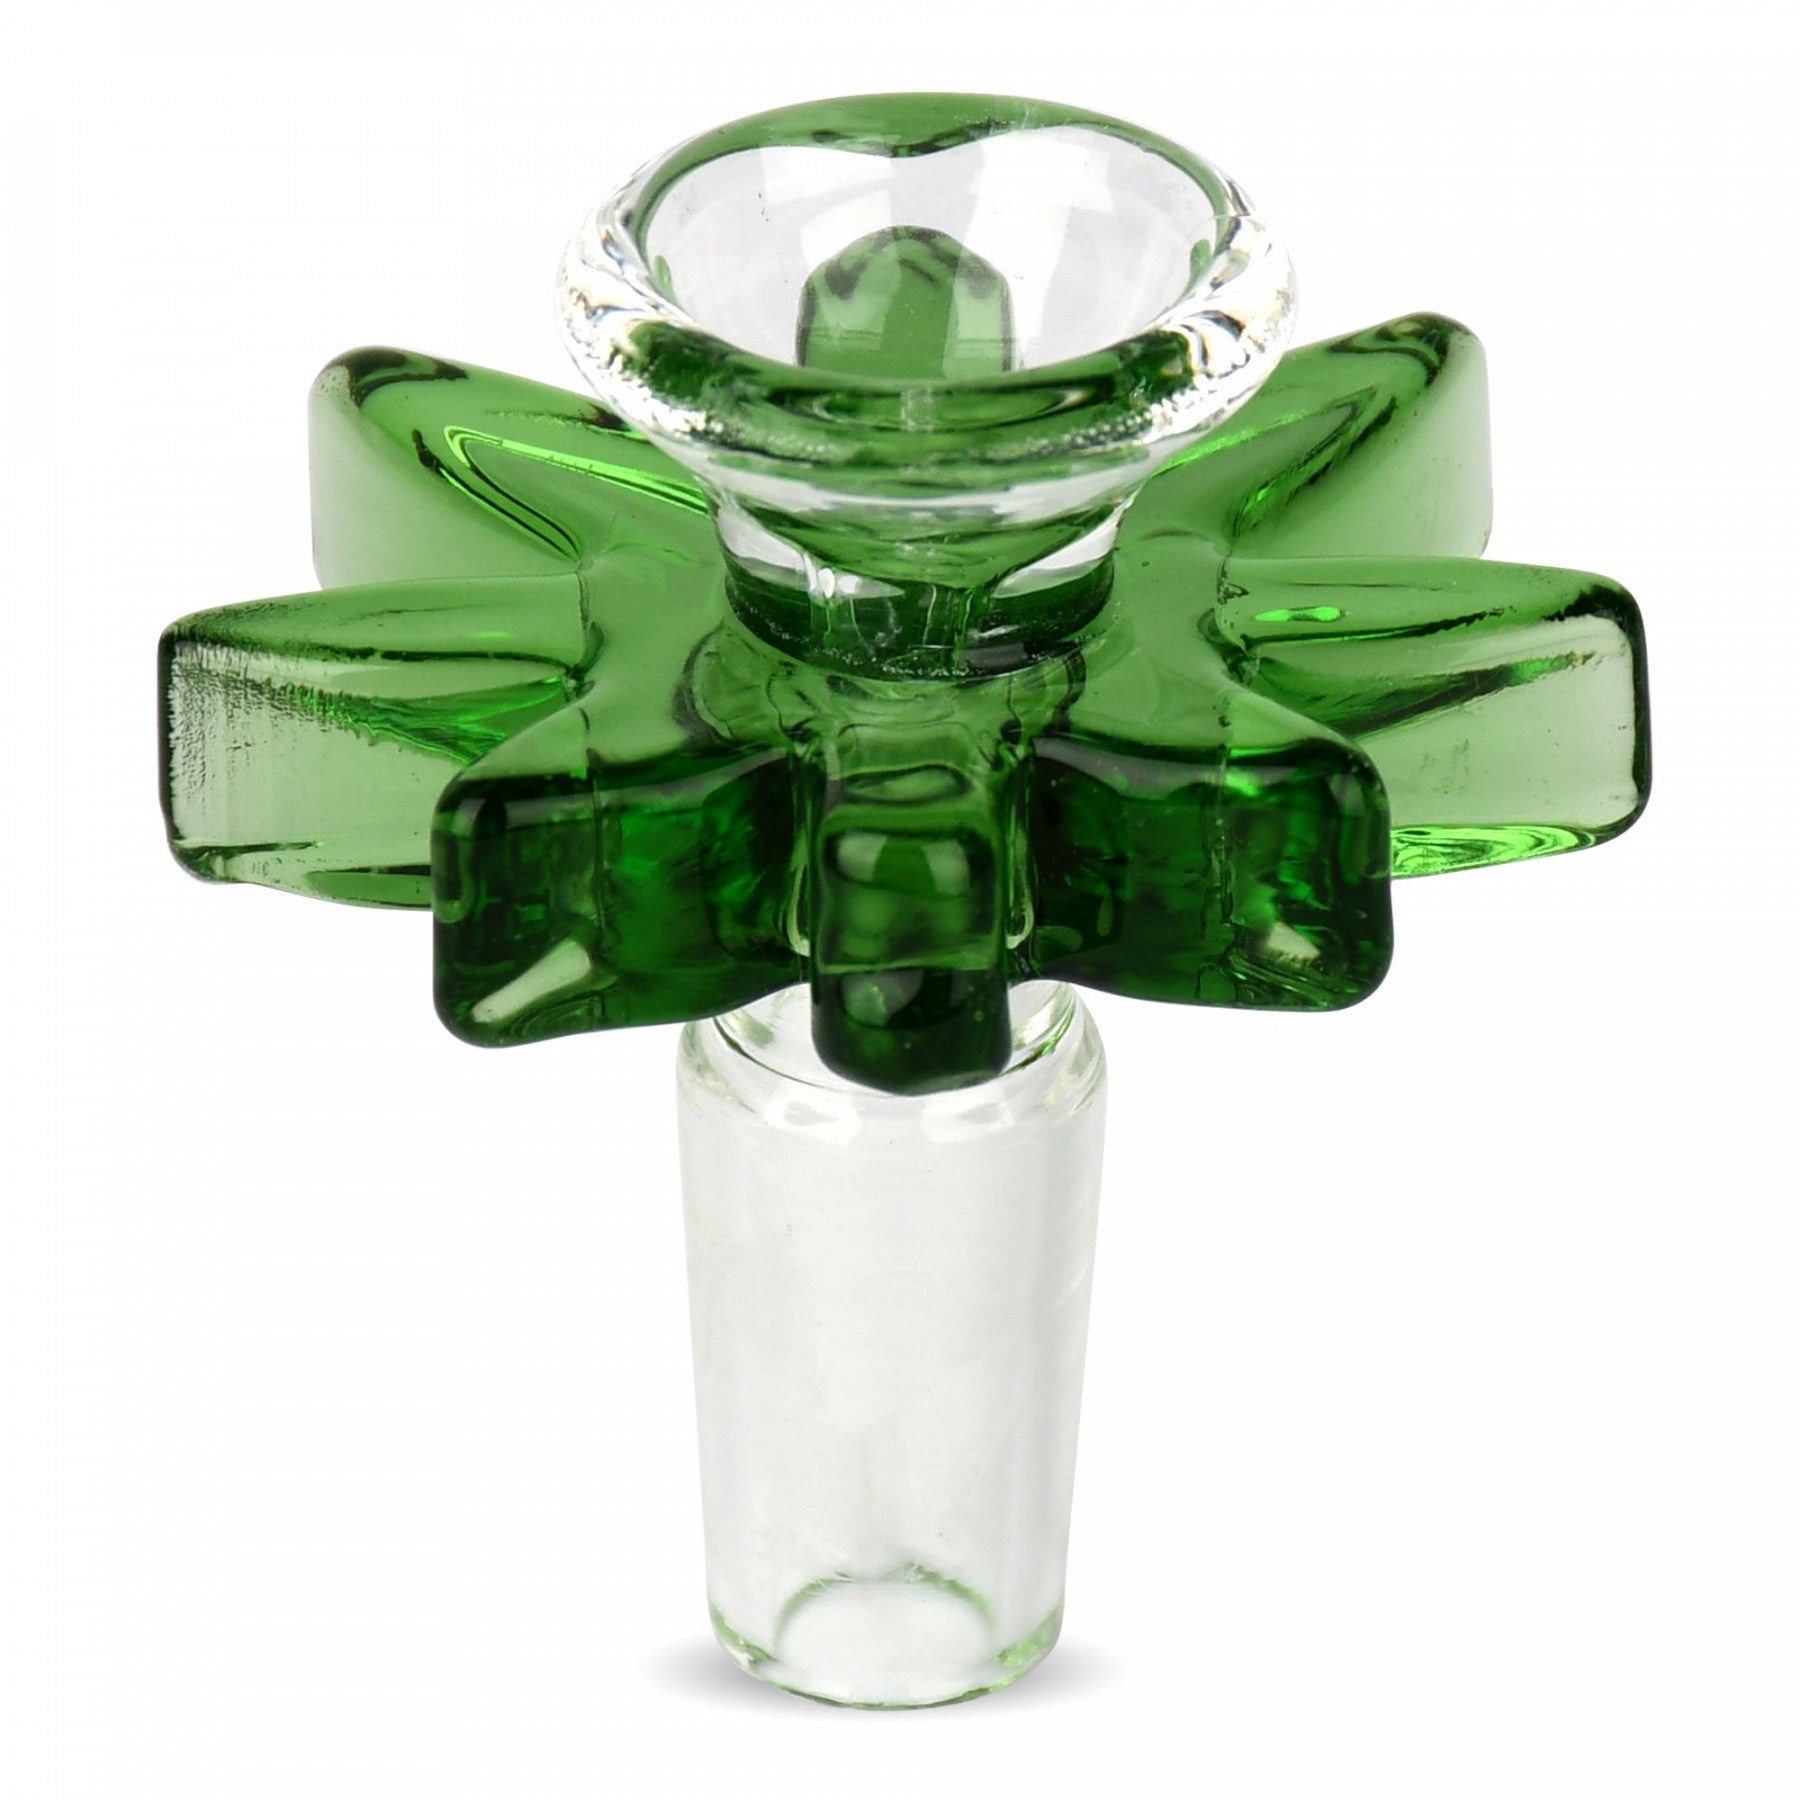 14mm Glass Bowl with Glass Green Leaf Design